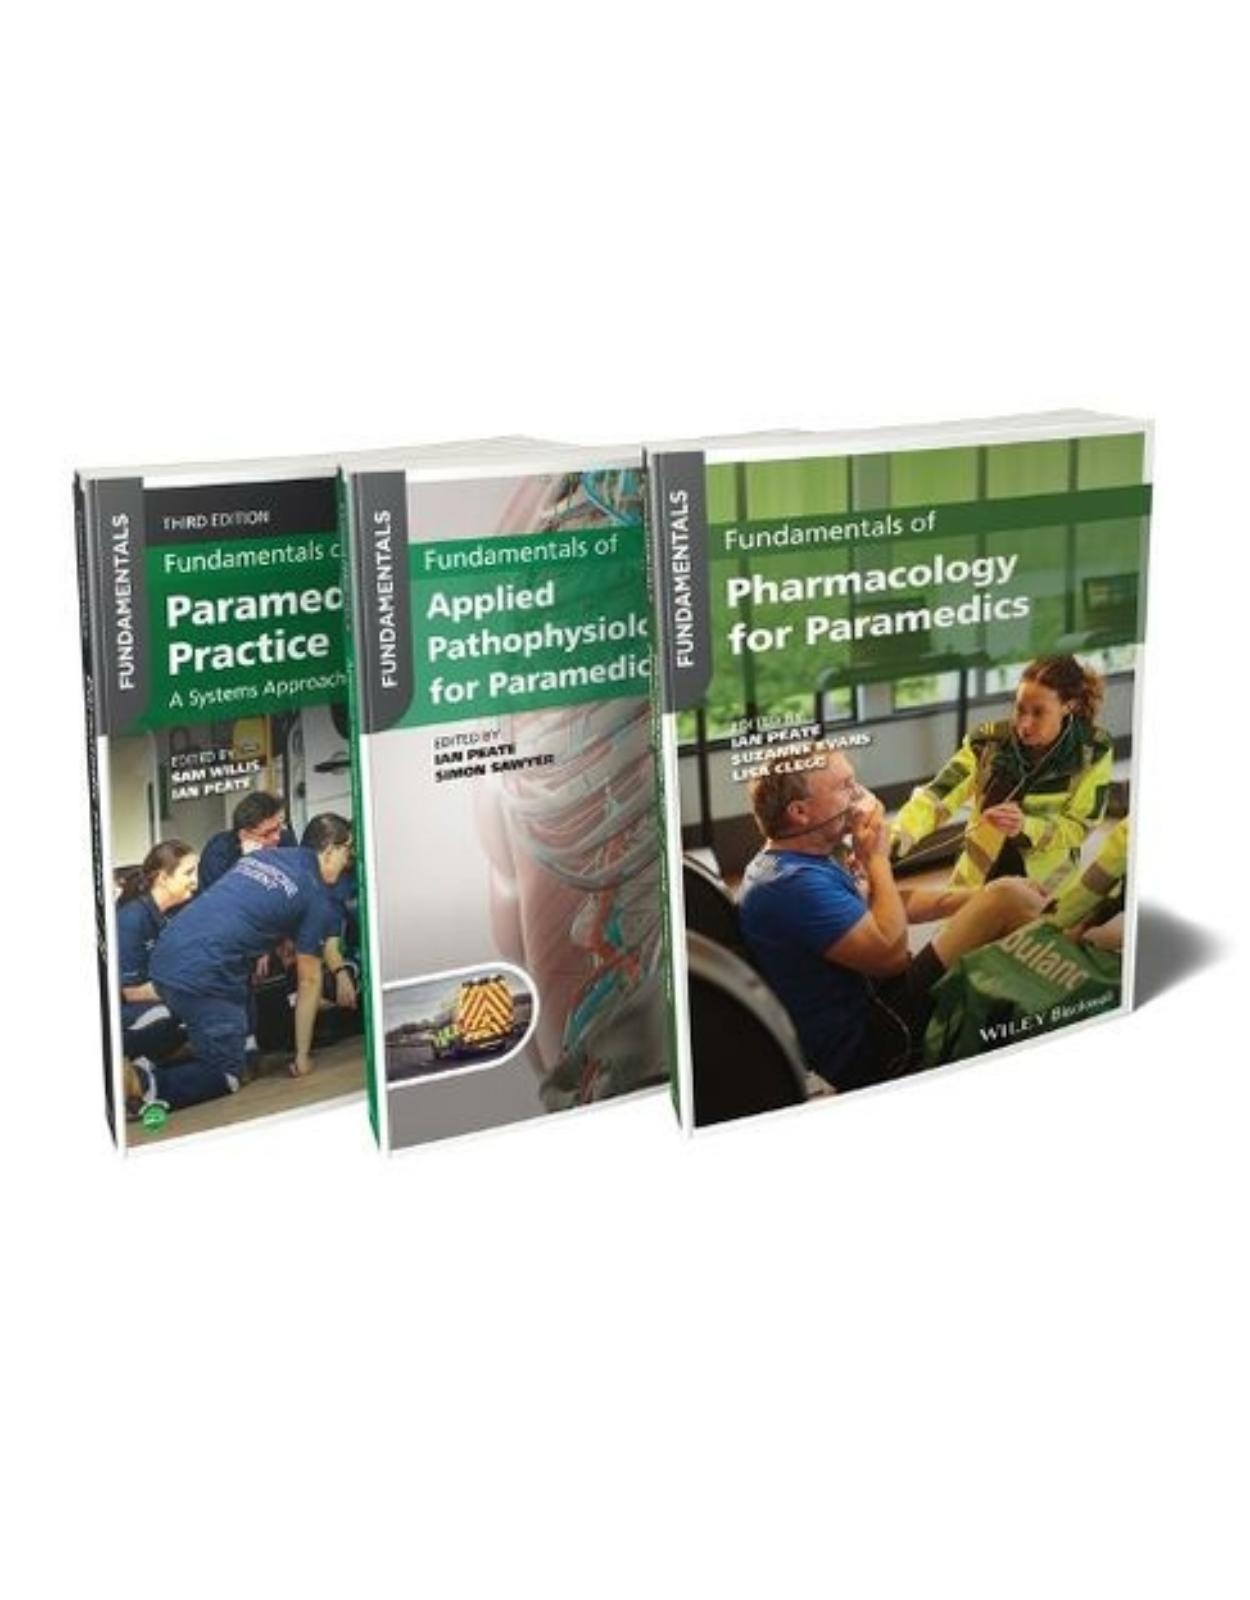 The Paramedic′s Essential Bundle: Practice, Pathop hysiology, and Pharmacology